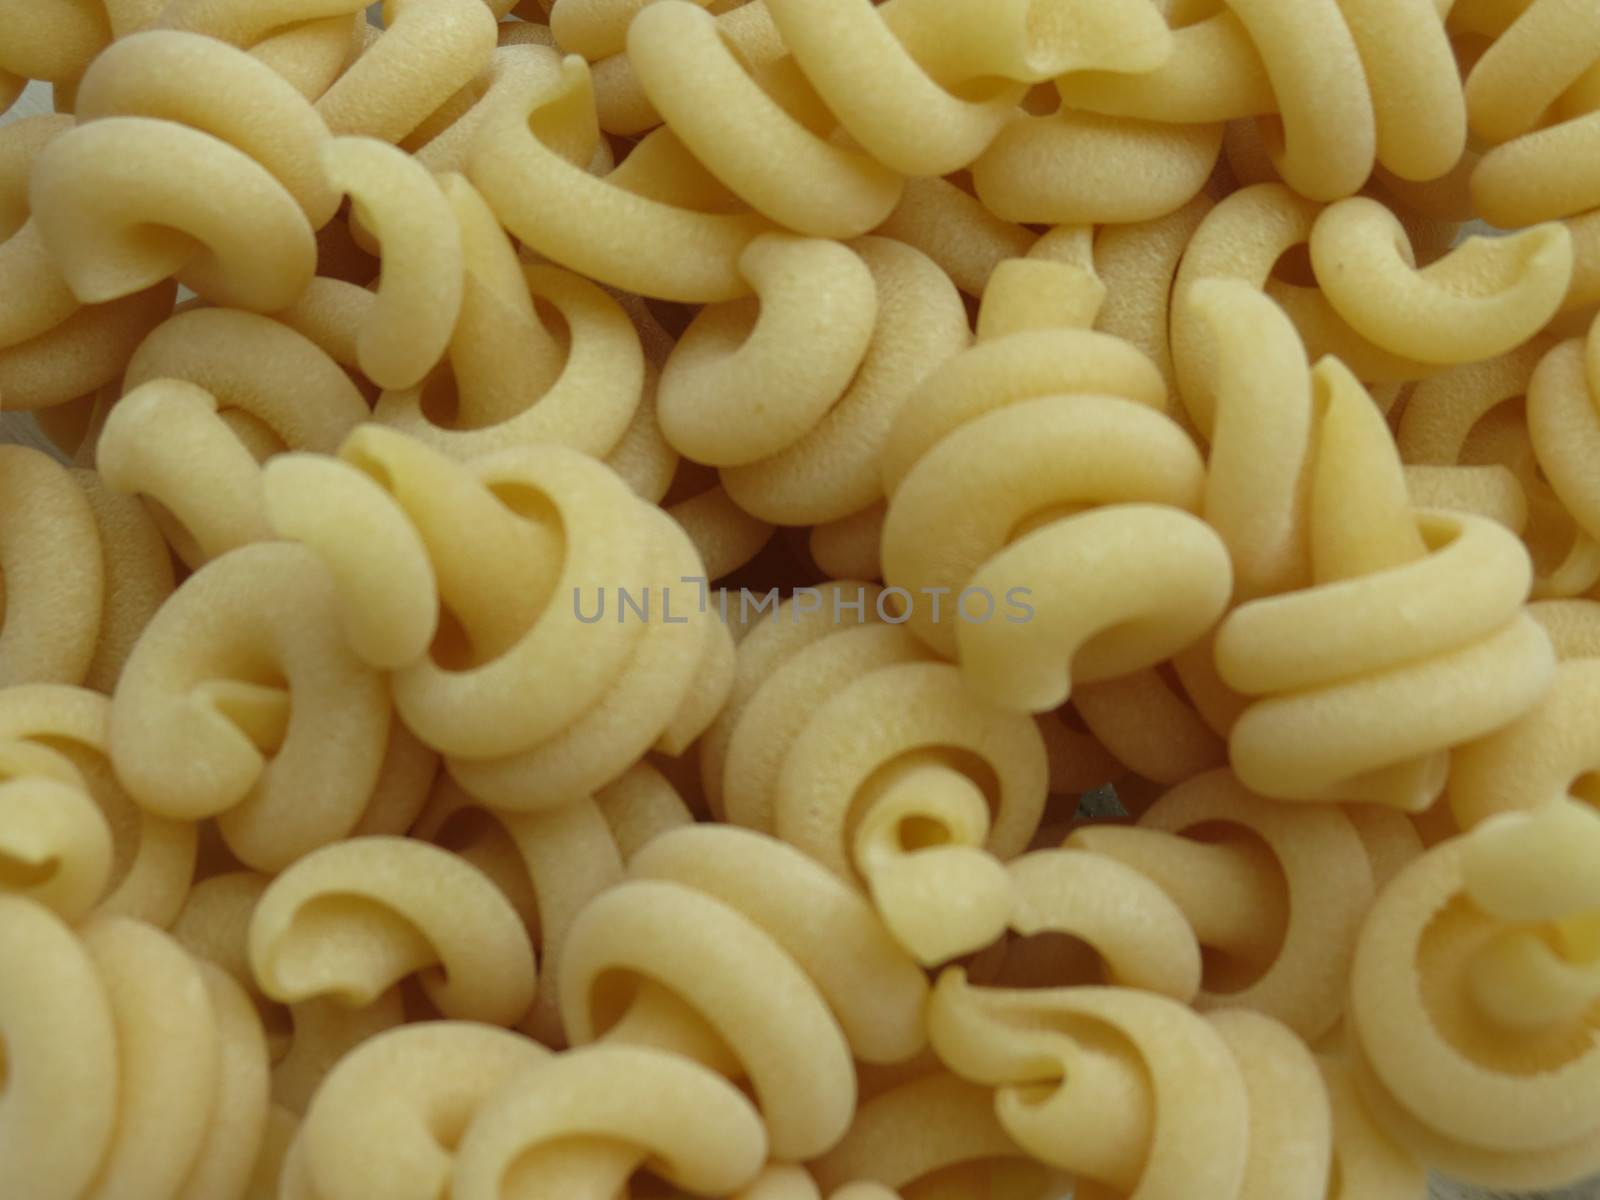 Detail of Macaroni pasta useful as a background